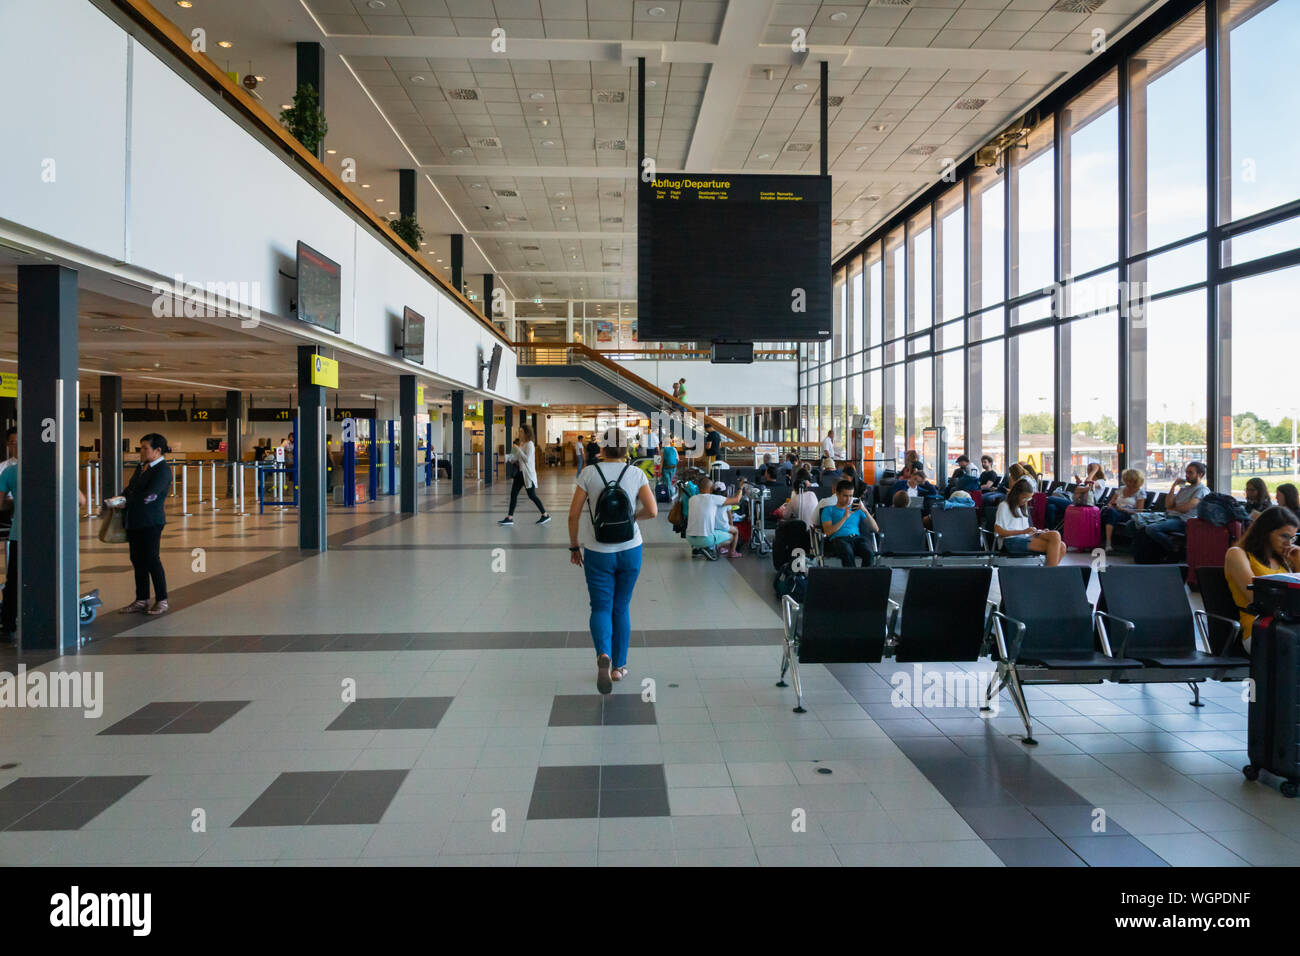 Berlin, Germany - July 2019: Berlin Schonefeld Airport architecture and passengers in Berlin, Germany. Stock Photo